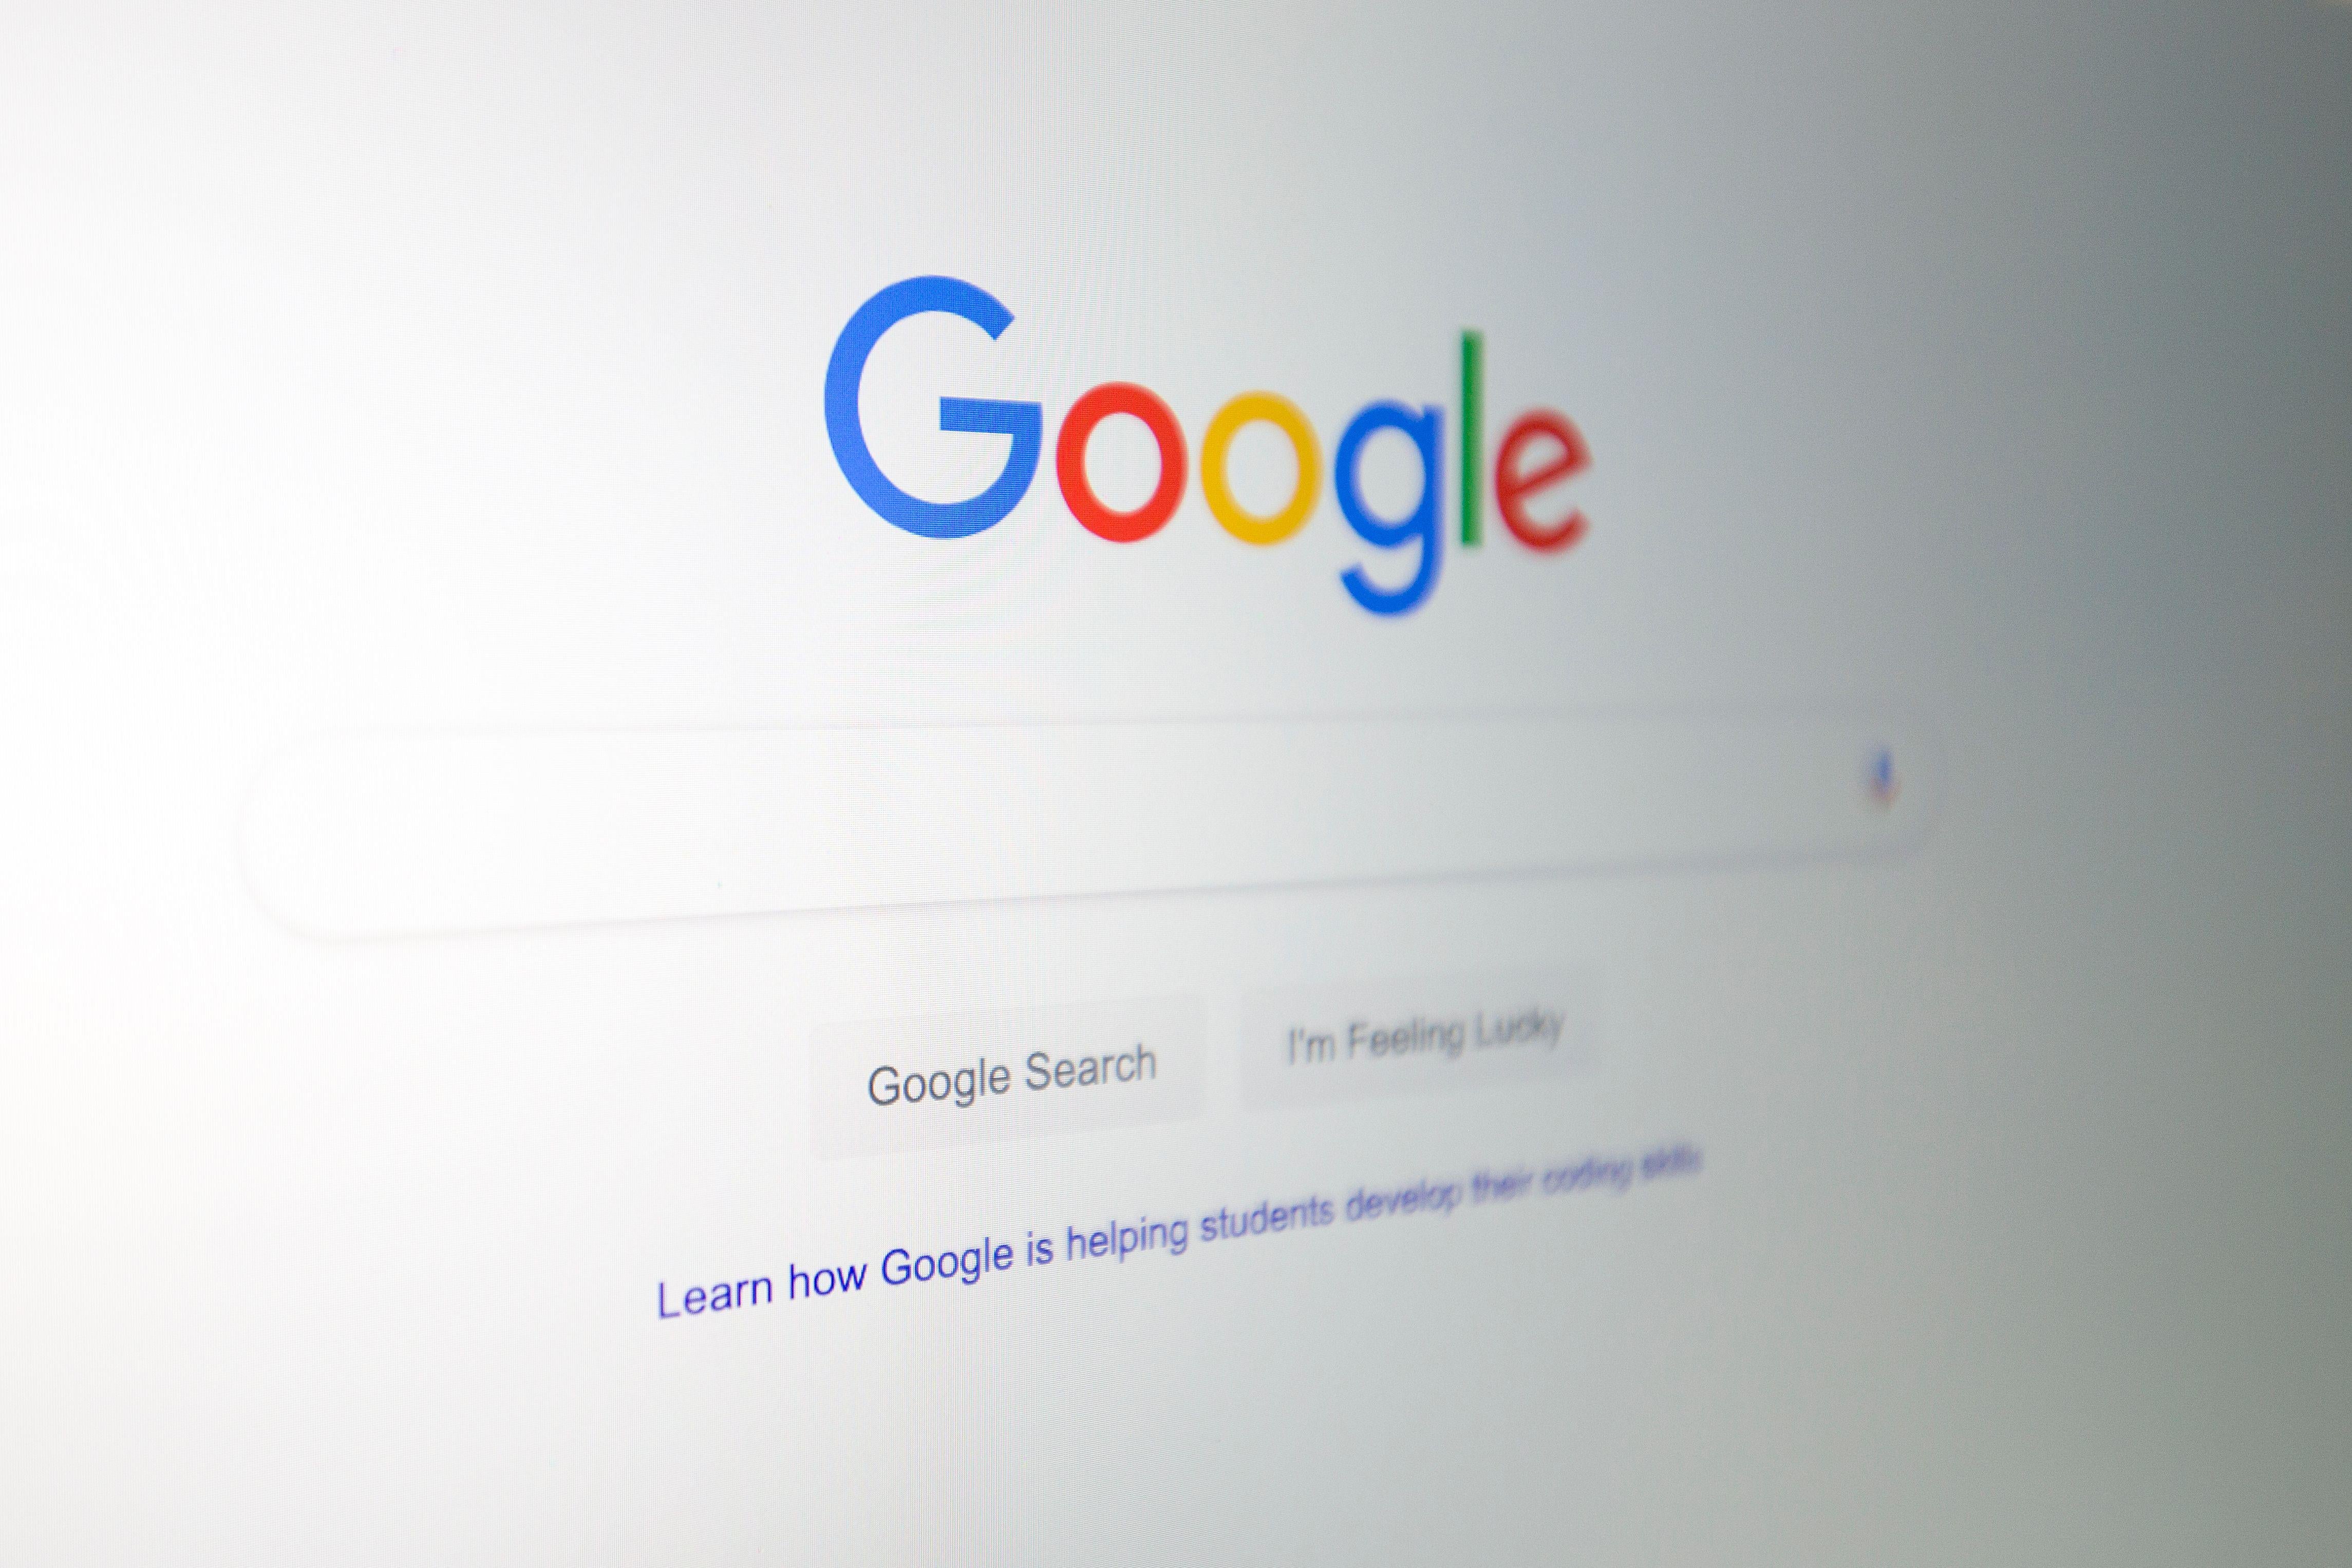 The Google logo is seen on a computer screen in a photo illustration